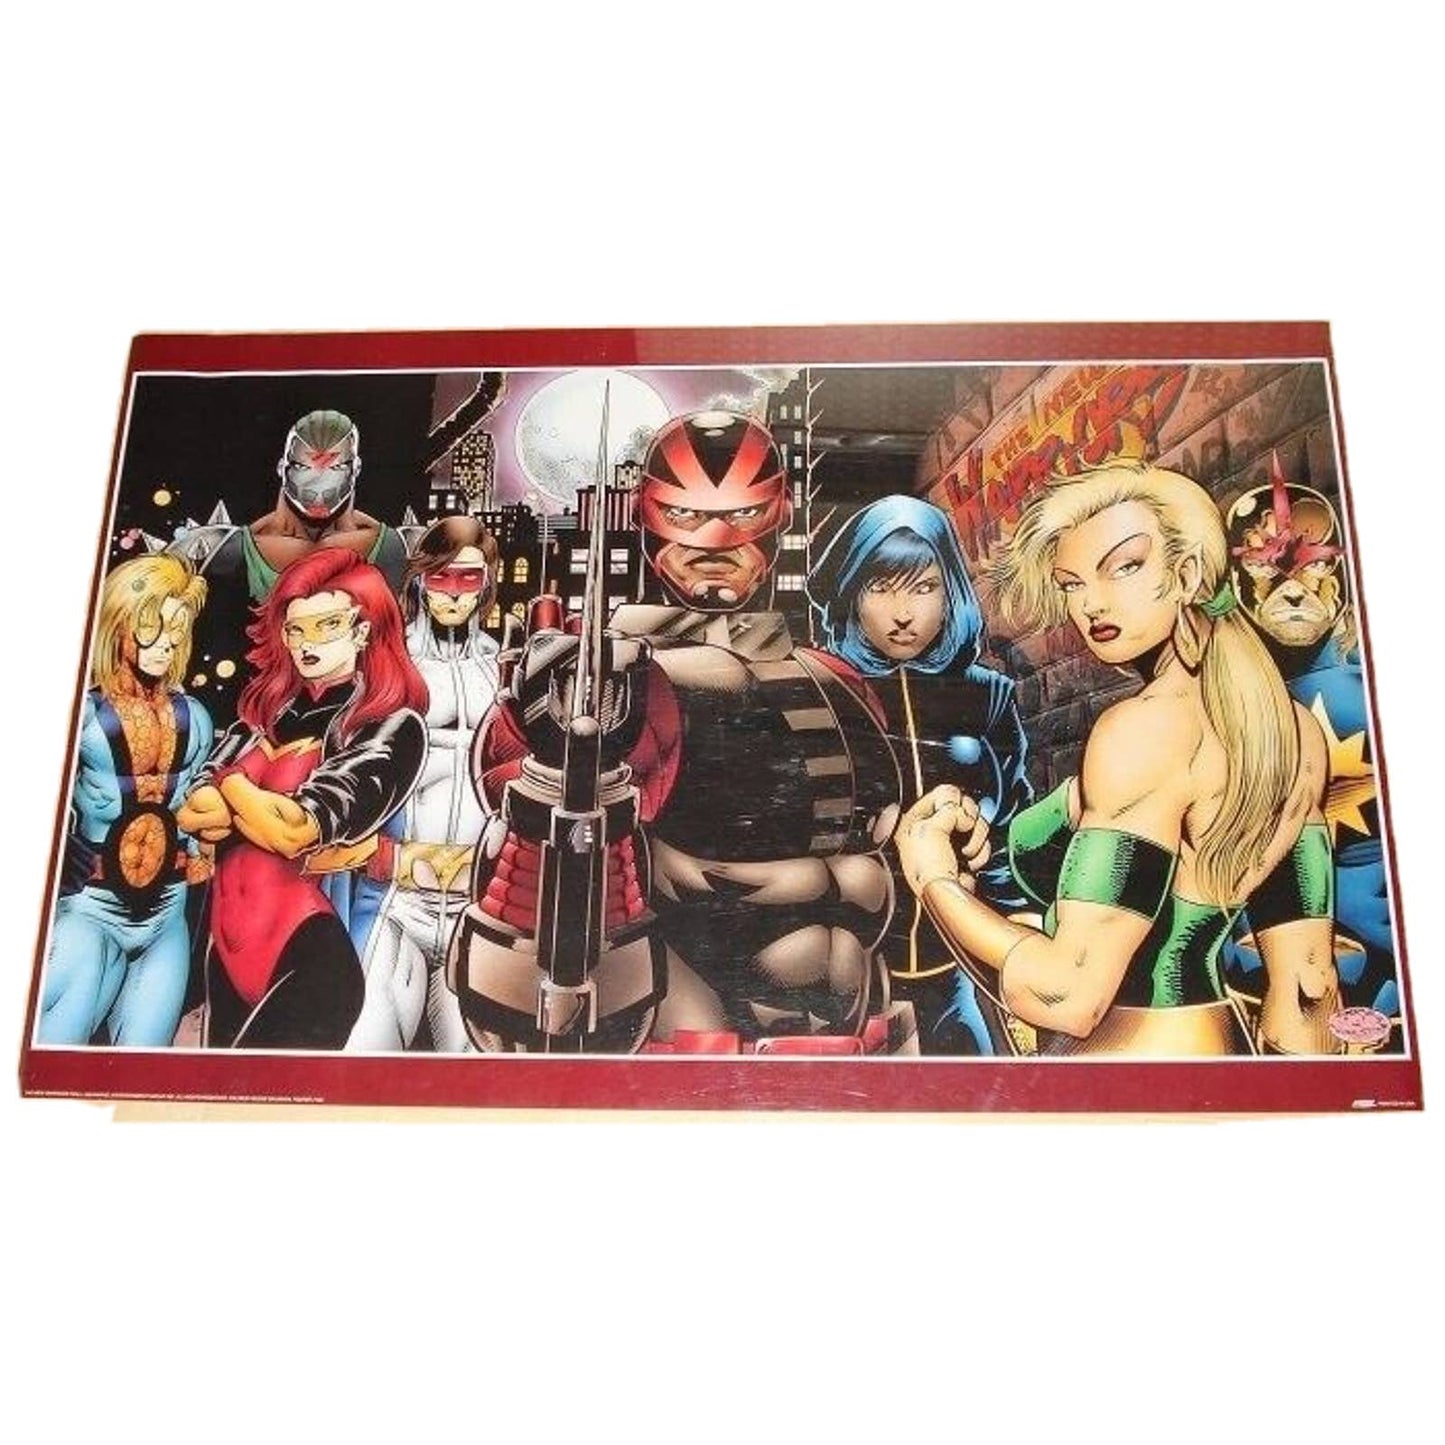 Marvel Comics 1993 The New Warriors Poster #150 34"x22" Never Displayed